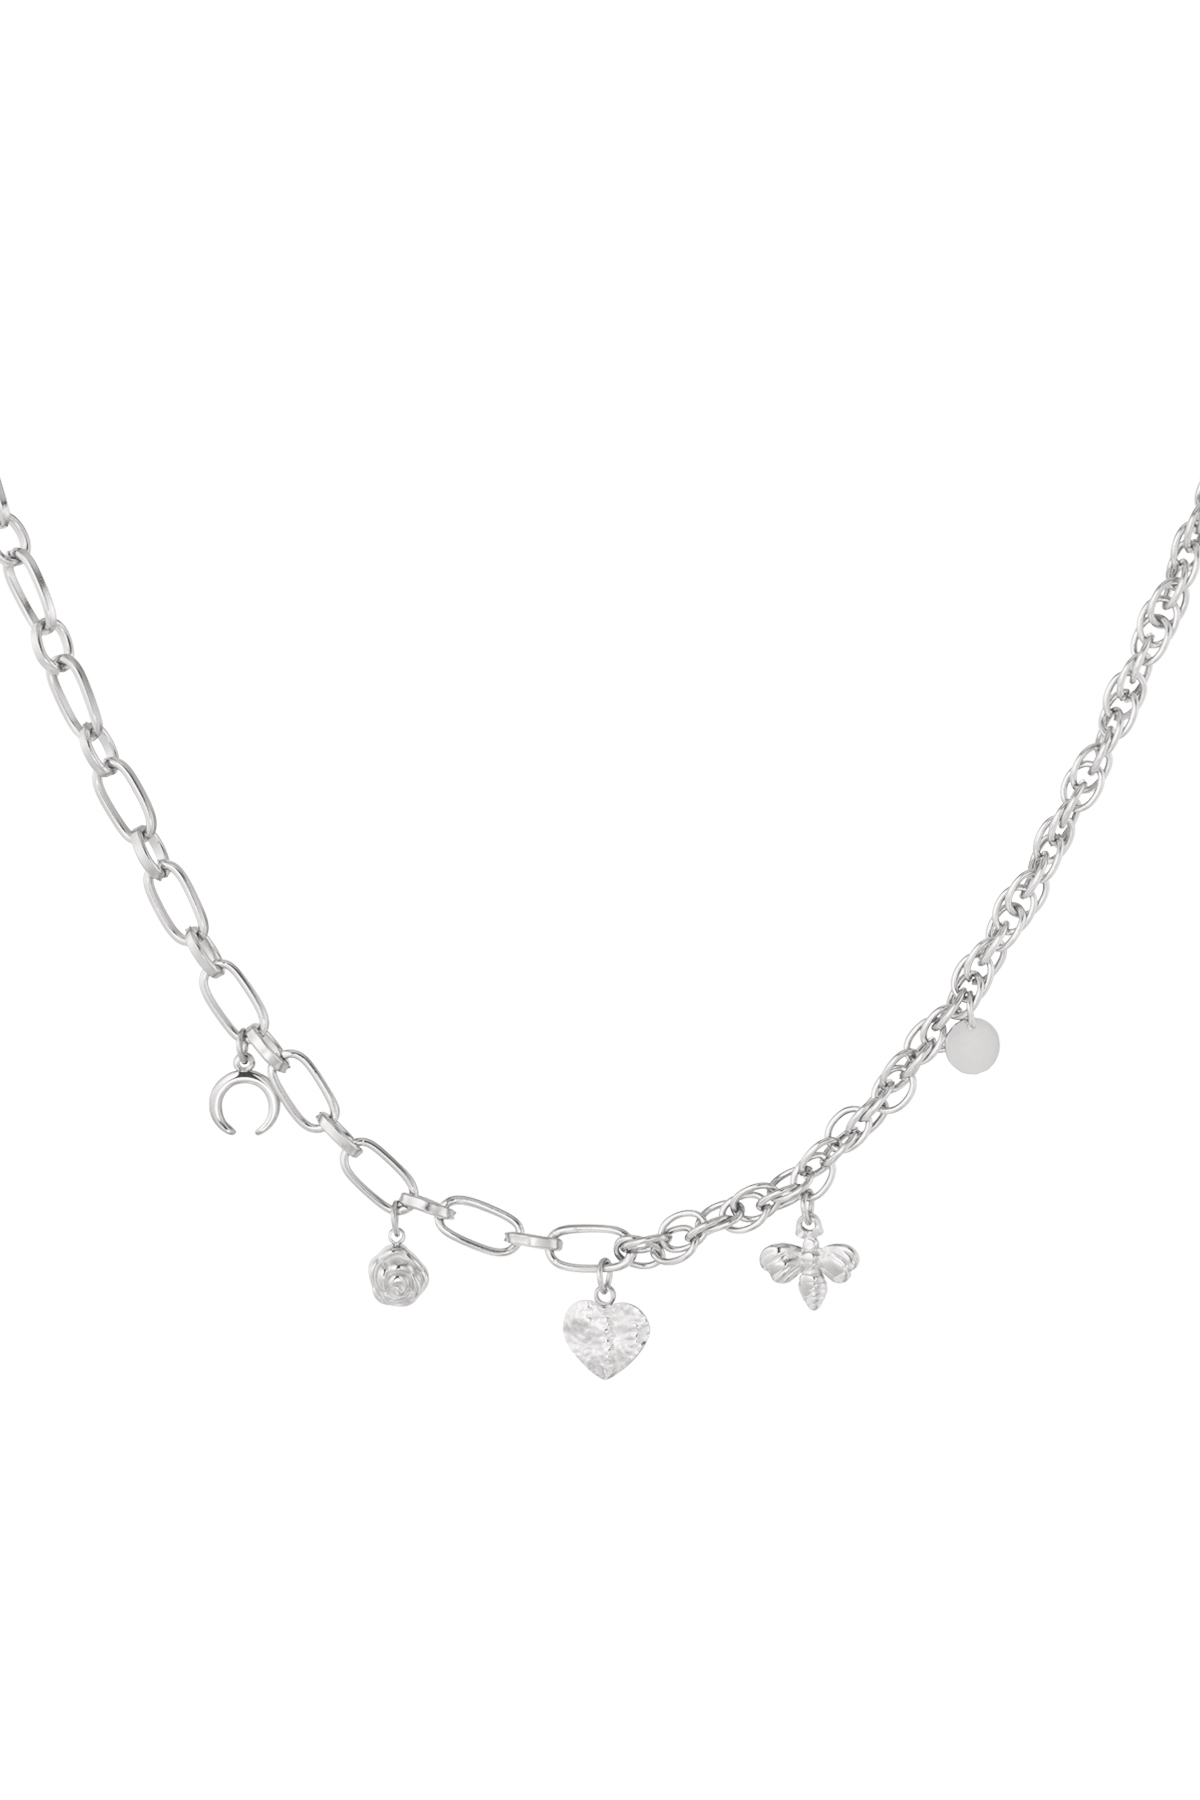 Chain links with charms - silver